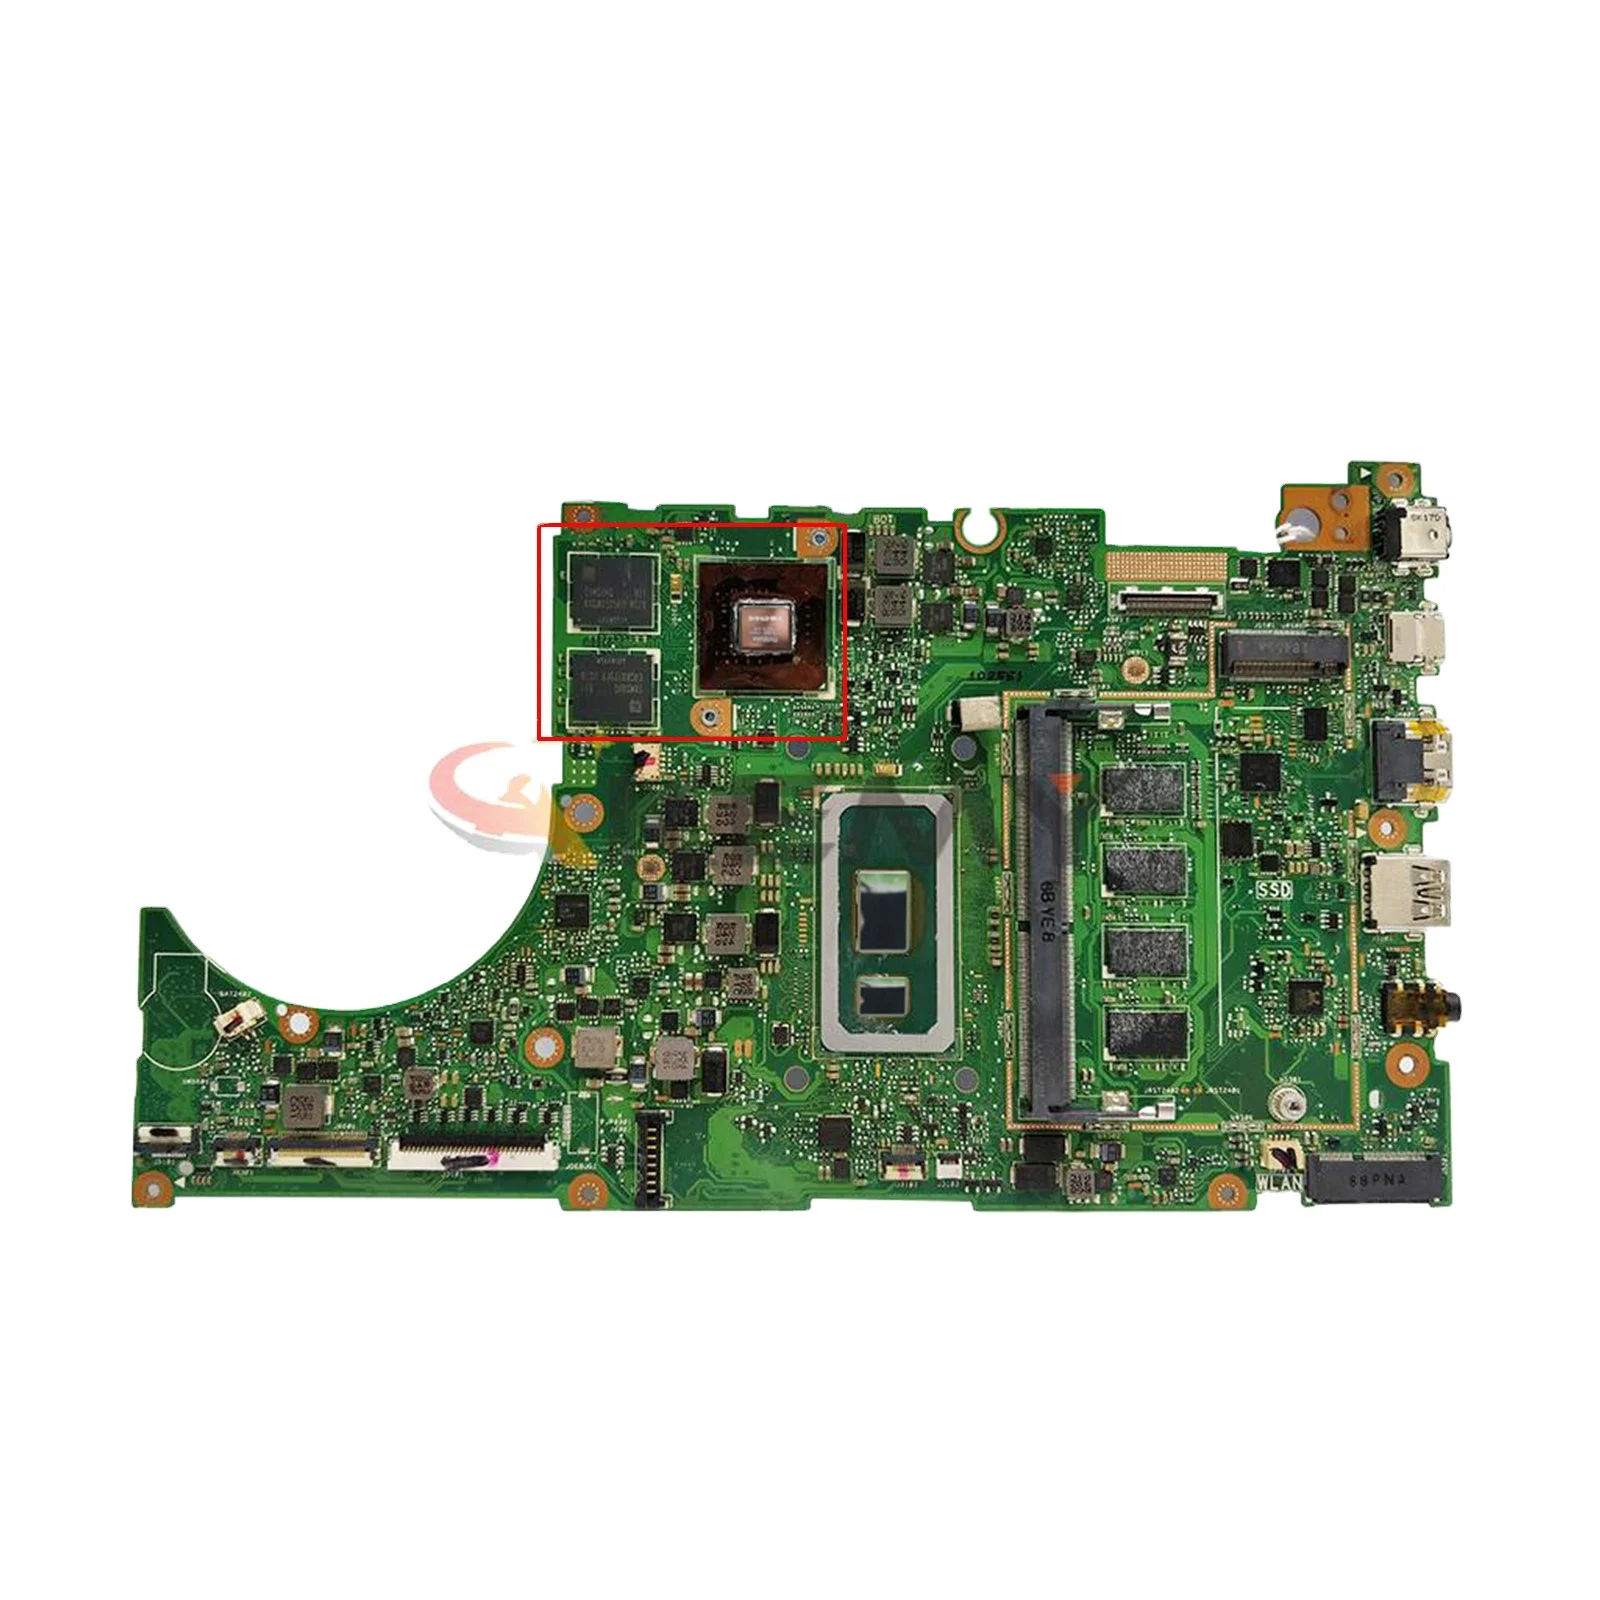 

P5440F Mainboard For ASUS PRO P5340FF P5440UF P5440FF Laptop Motherboard I3 I5 I7 8th Gen CPU 4G 8G-RAM 940MX Test 100%